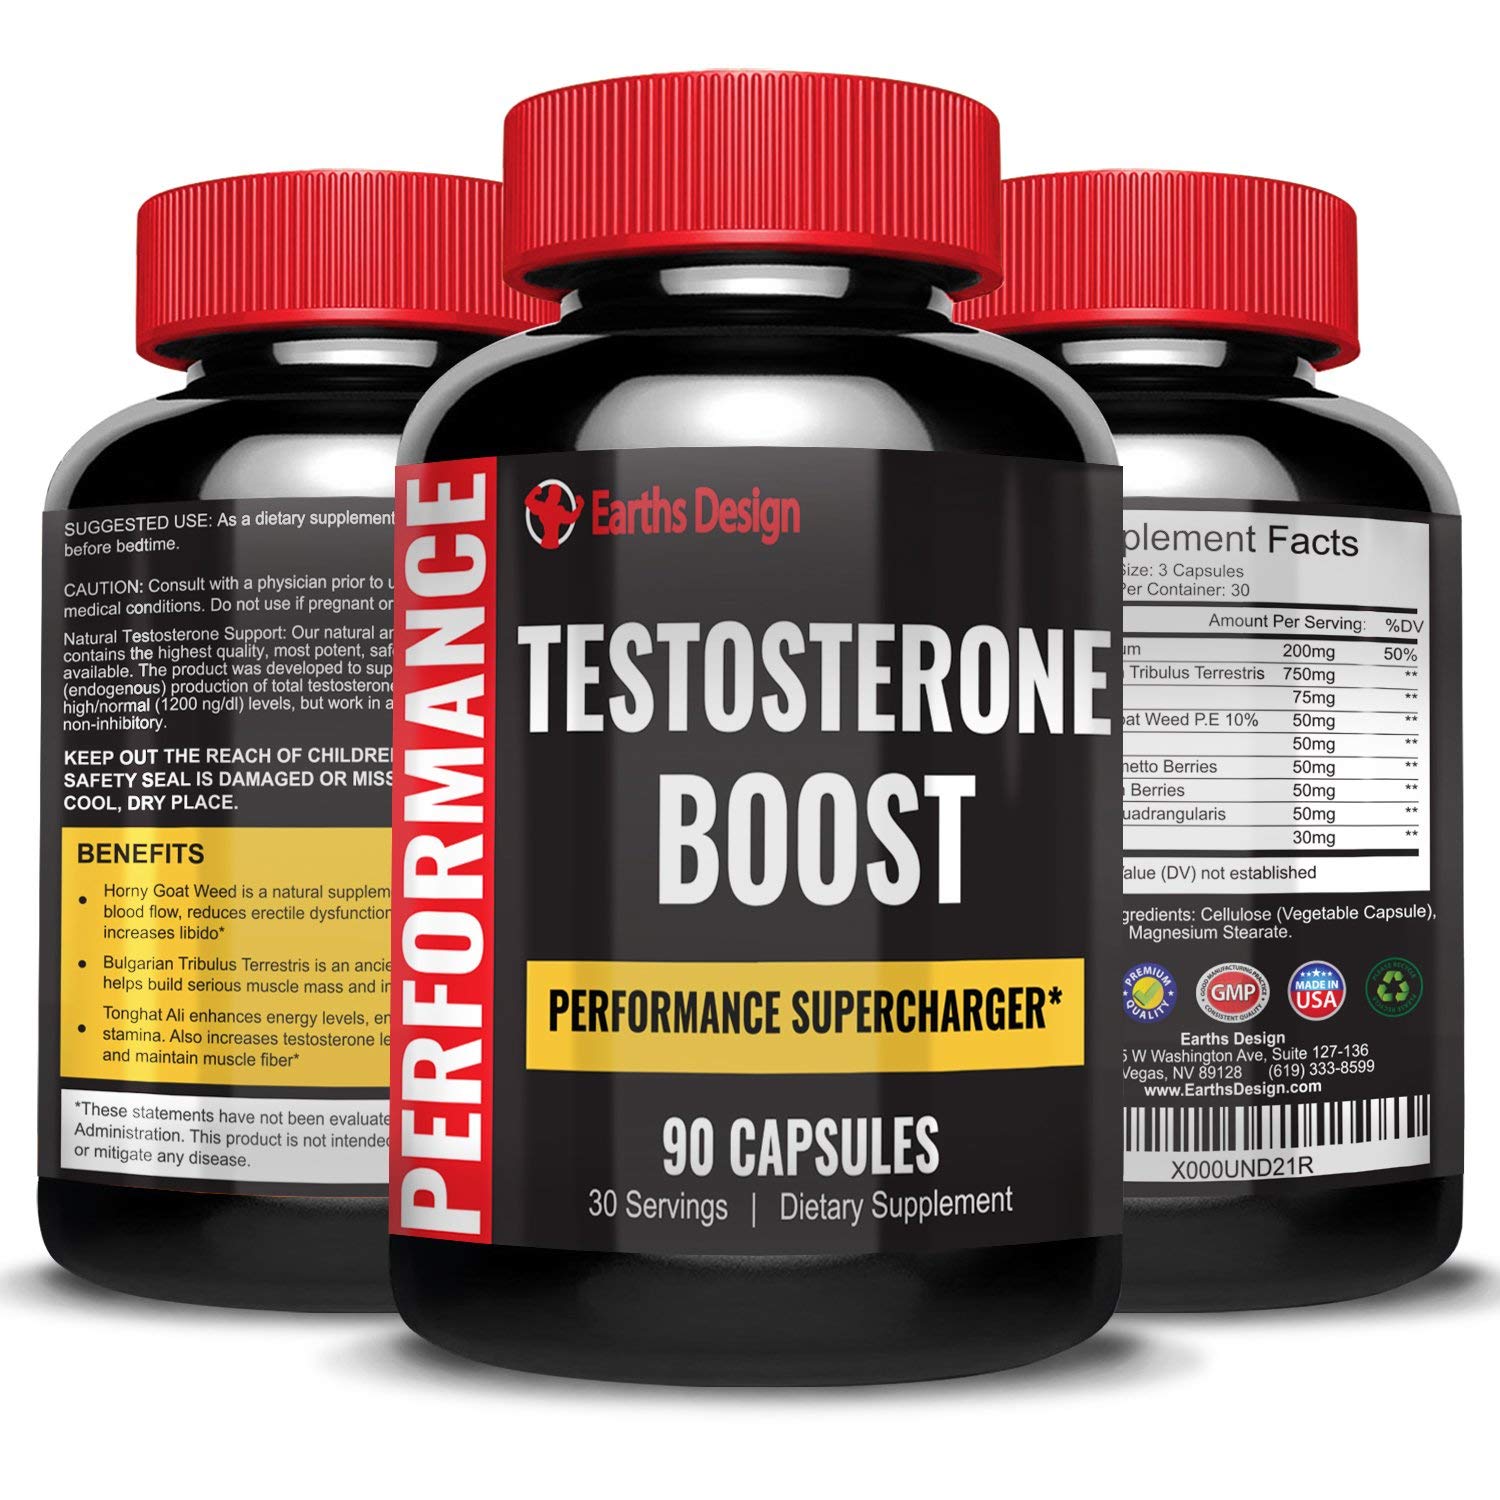 What supplements will increase testosterone